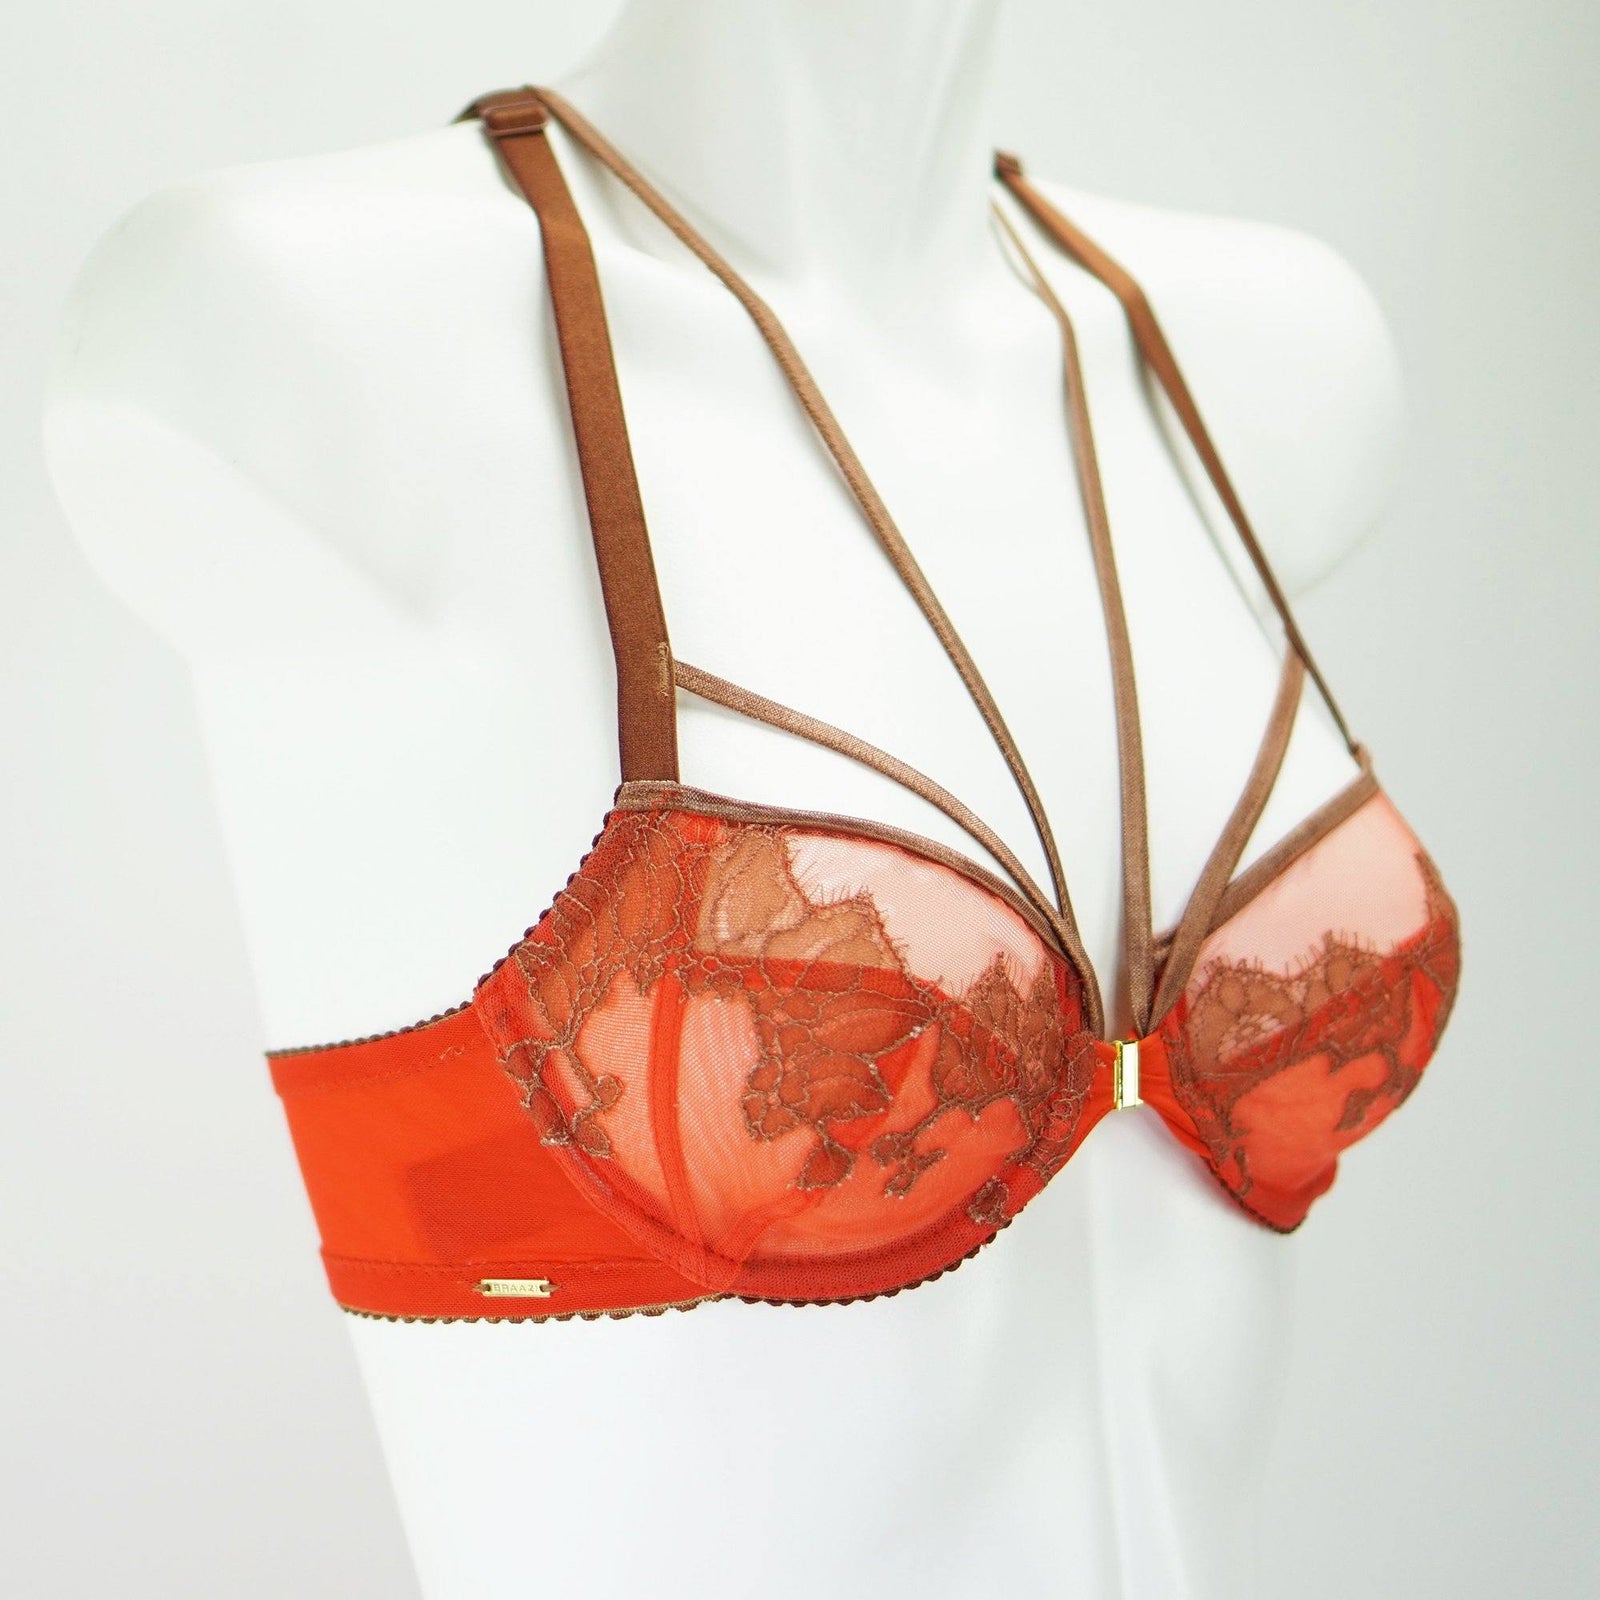 Isabelle Padded Bra with Lace Appliqued Cups Mandarin Orange